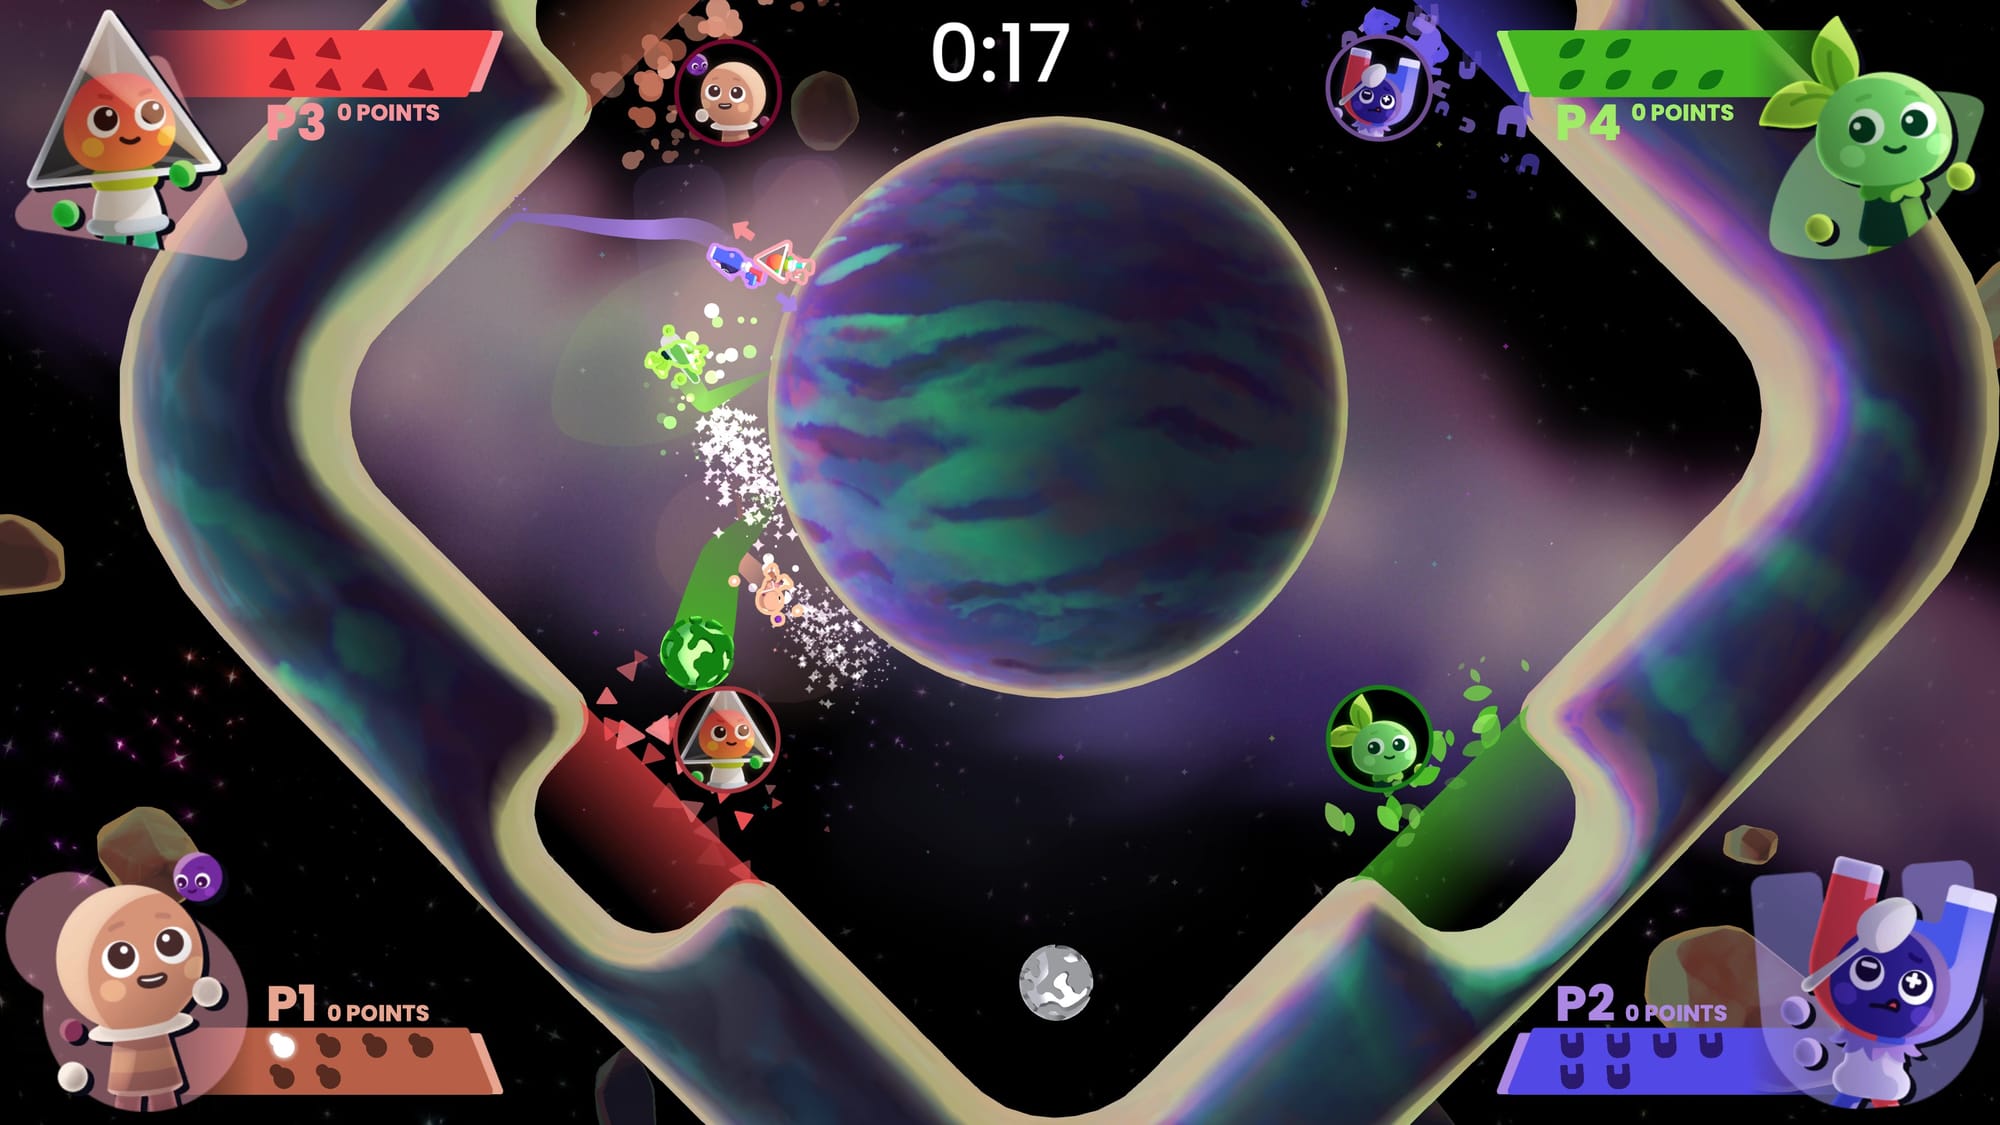 Gameplay for a minigame. Players lob and collect comets.